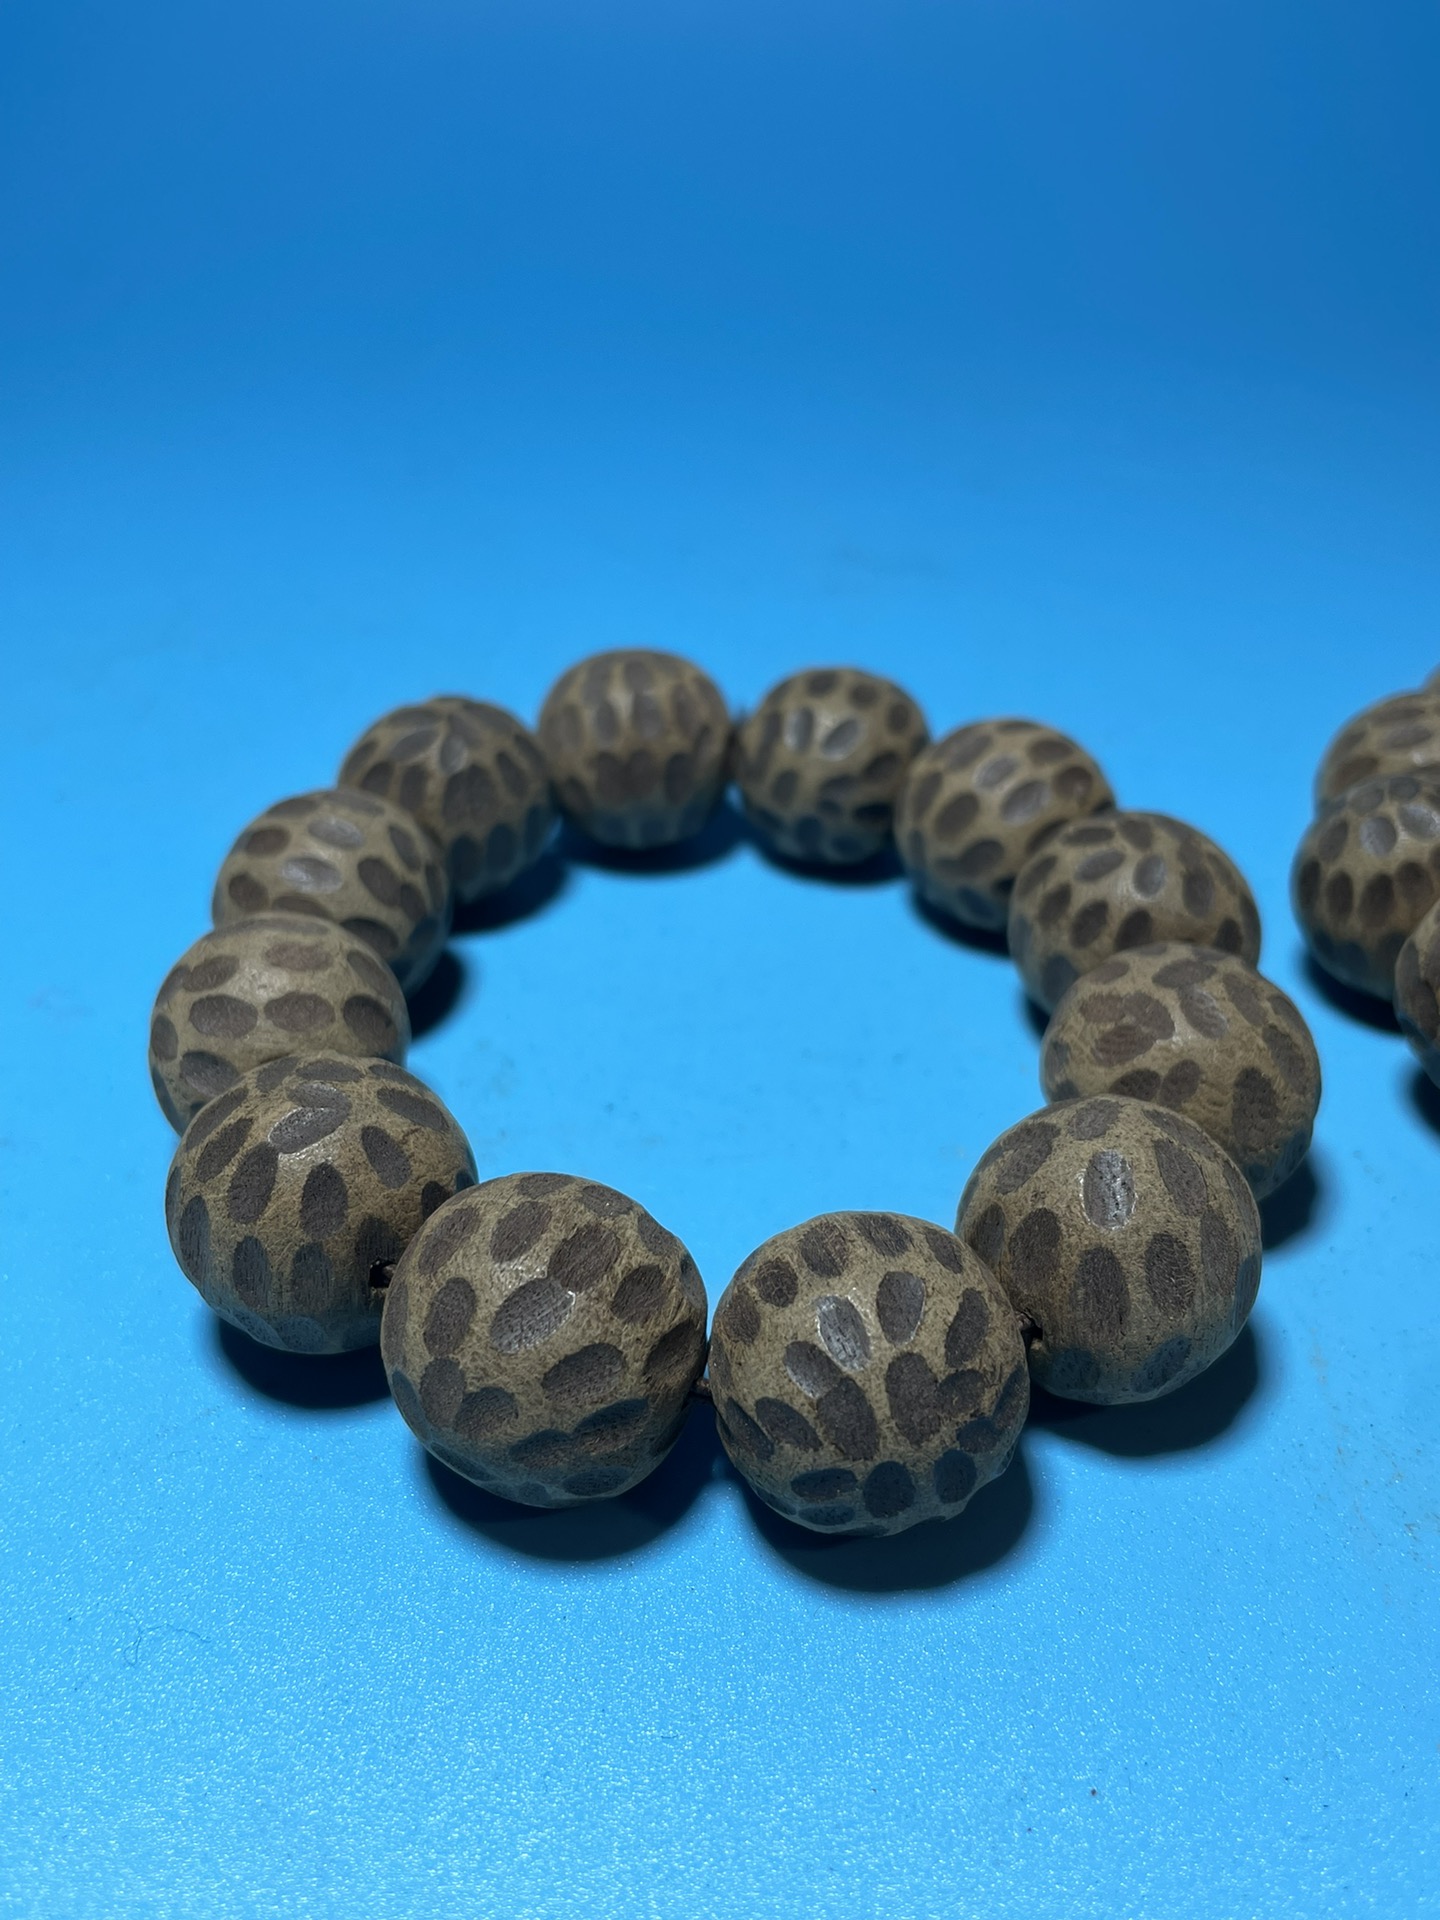 Exquisite collection of old material agarwood bracelets - Image 6 of 8